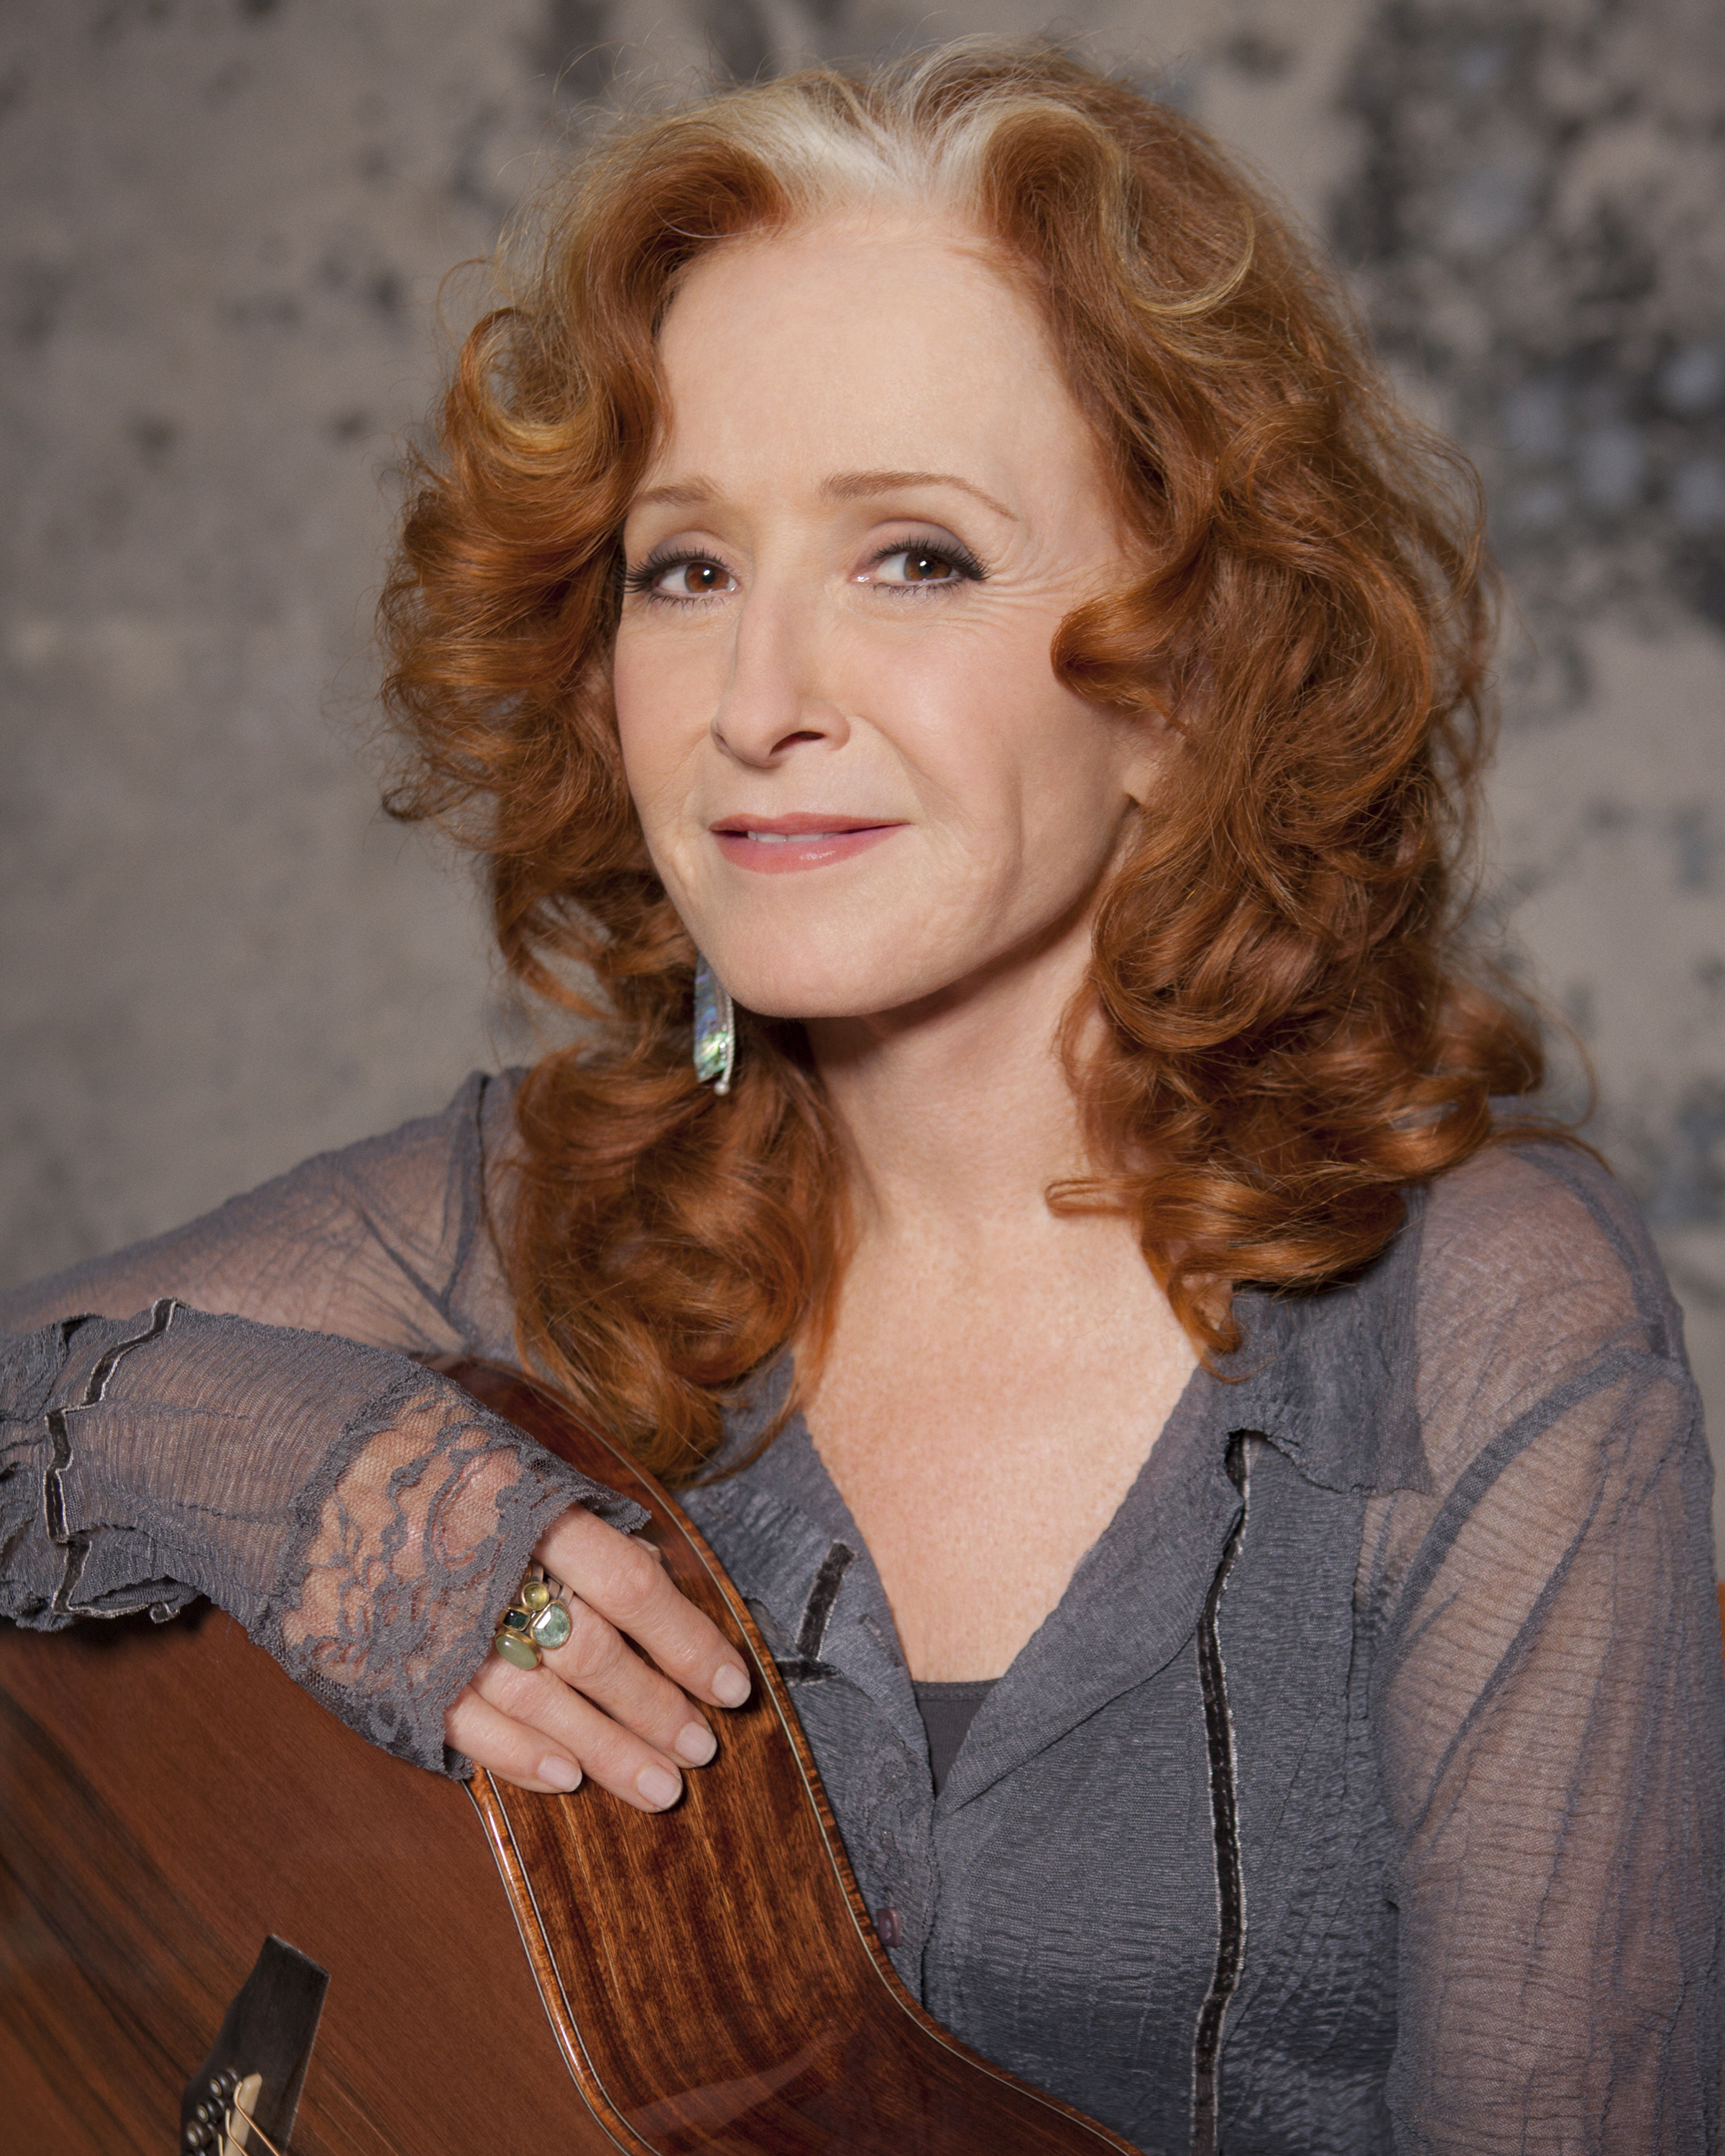 Ten-time Grammy winner Bonnie Raitt will visit Maui on her Dig in Deep tour for a concert at the Maui Arts & Cultural Center’s A&B Amphitheater & Yokouchi Pavilion Friday, March 24. Courtesy image.